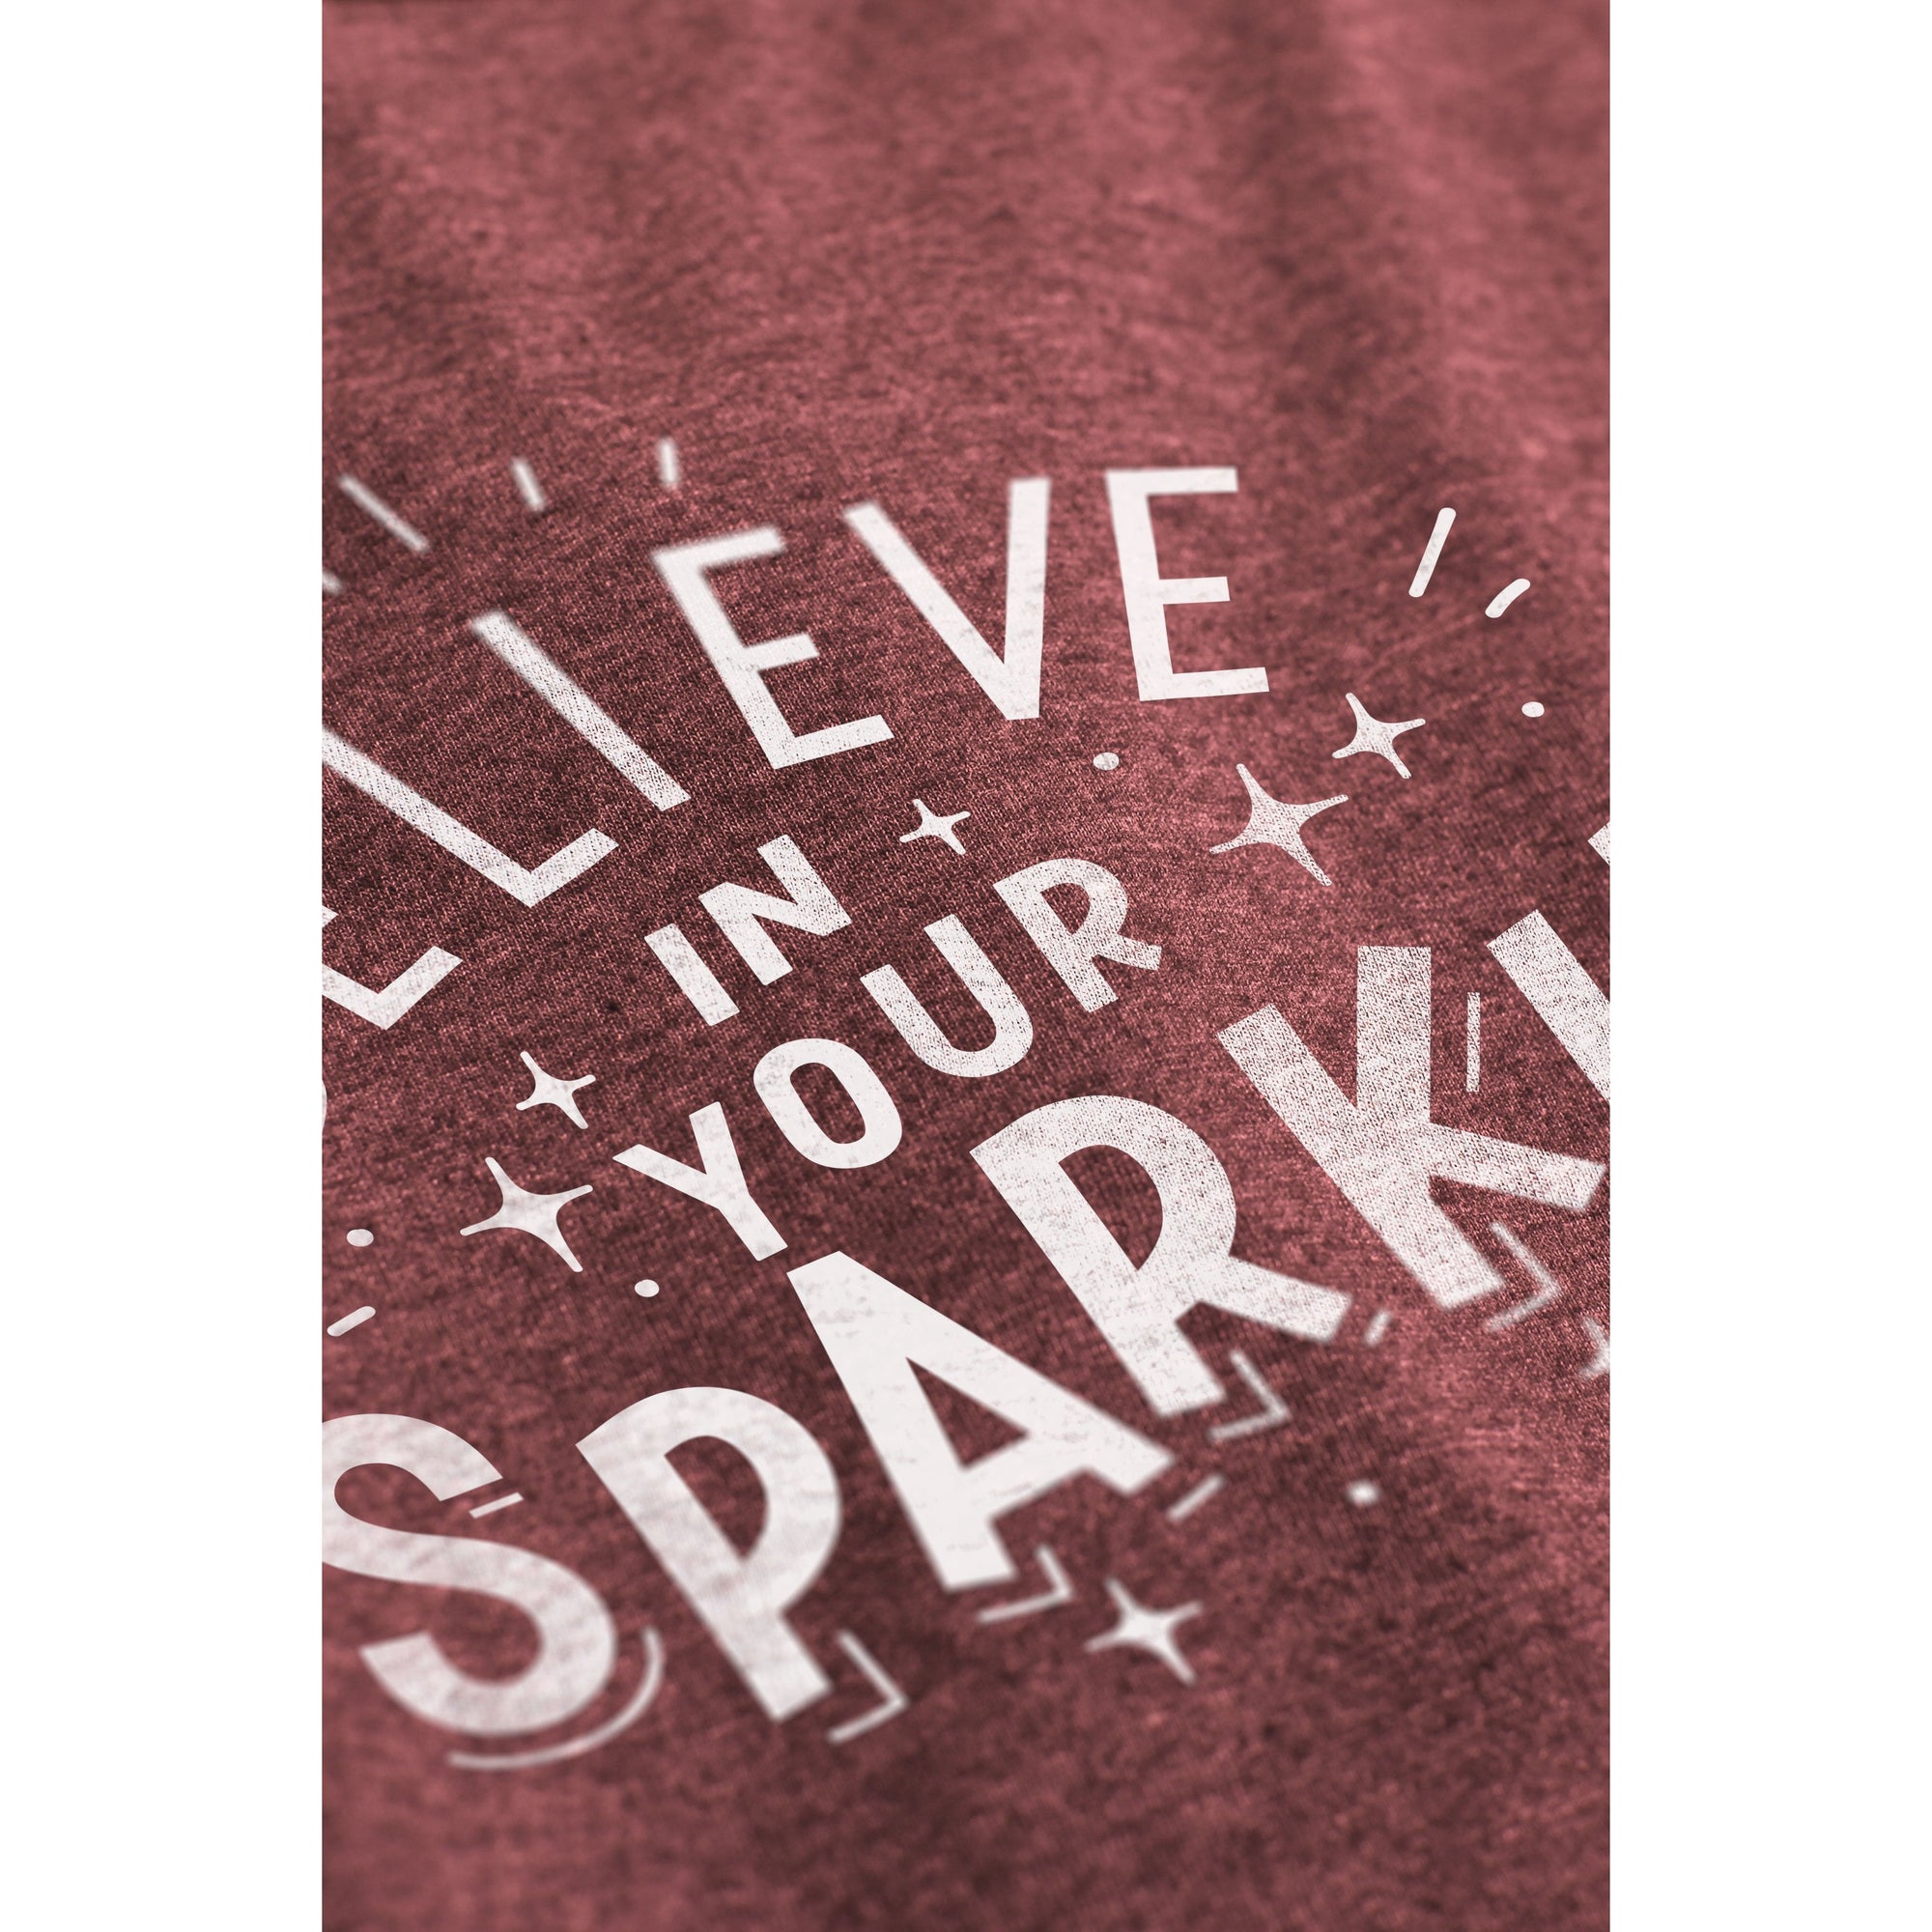 Believe In Your Sparkle